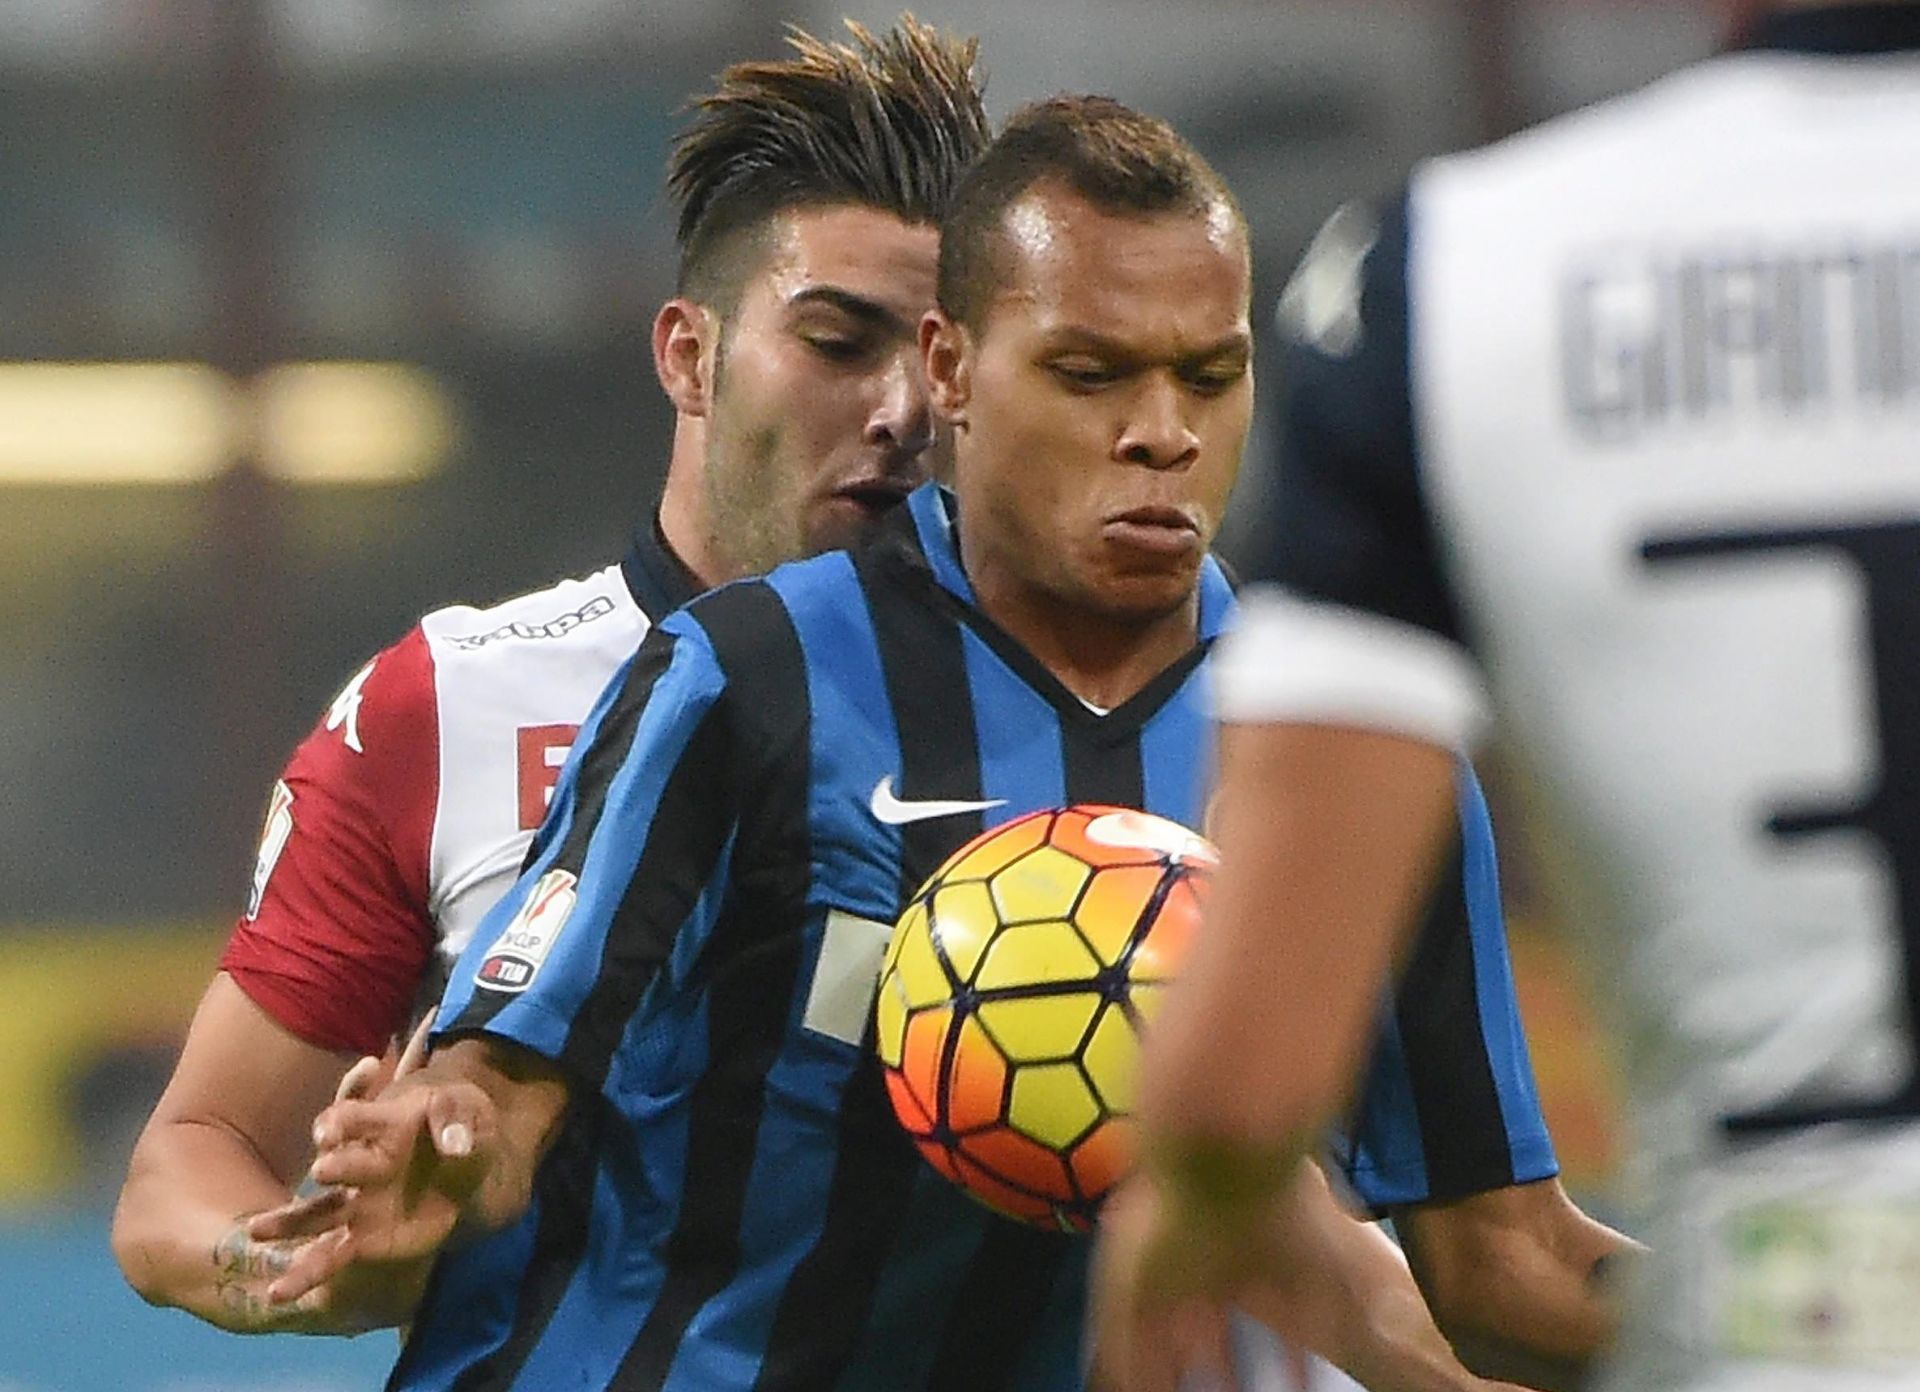 epa05070471 Inter Milan's forward Jonathan Ludovic Biabiany (R) struggles for the ball with Cagliari's defender Nicola Murru during their Italy Cup soccer match at the Giuseppe Meazza stadium in Milan, Italy, 15 December 2015.  EPA/DANIEL DAL ZENNARO